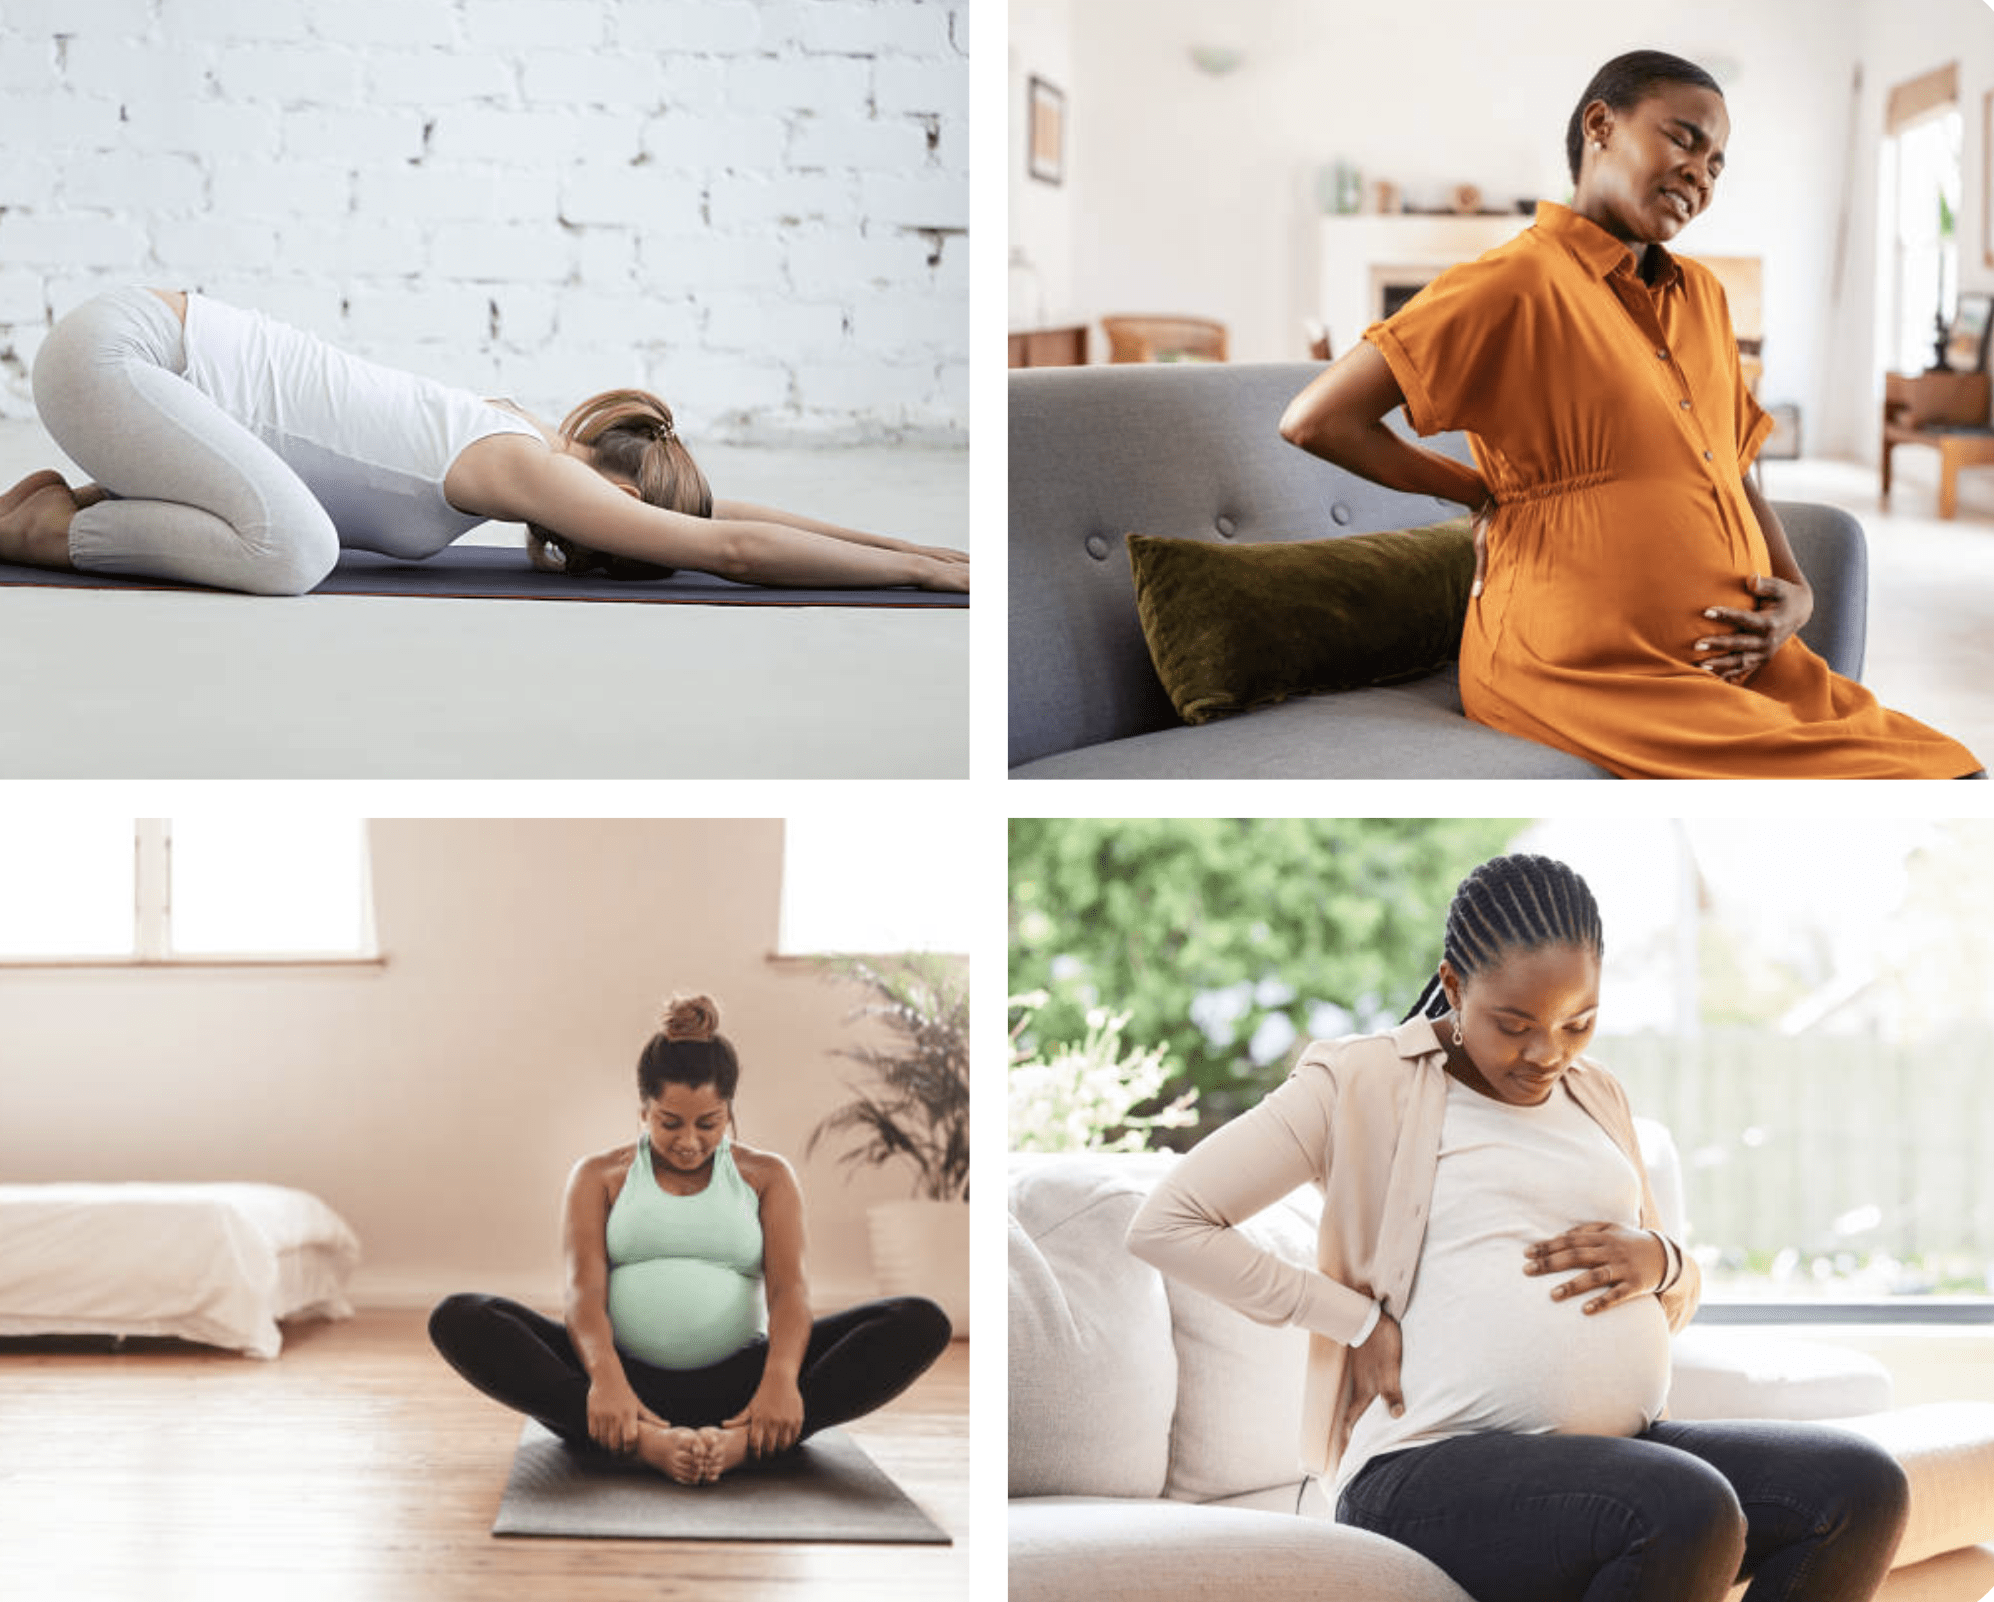 Postpartum Posture – 3 things you can address NOW for longterm benefit! by Dr. Hailey Jackson